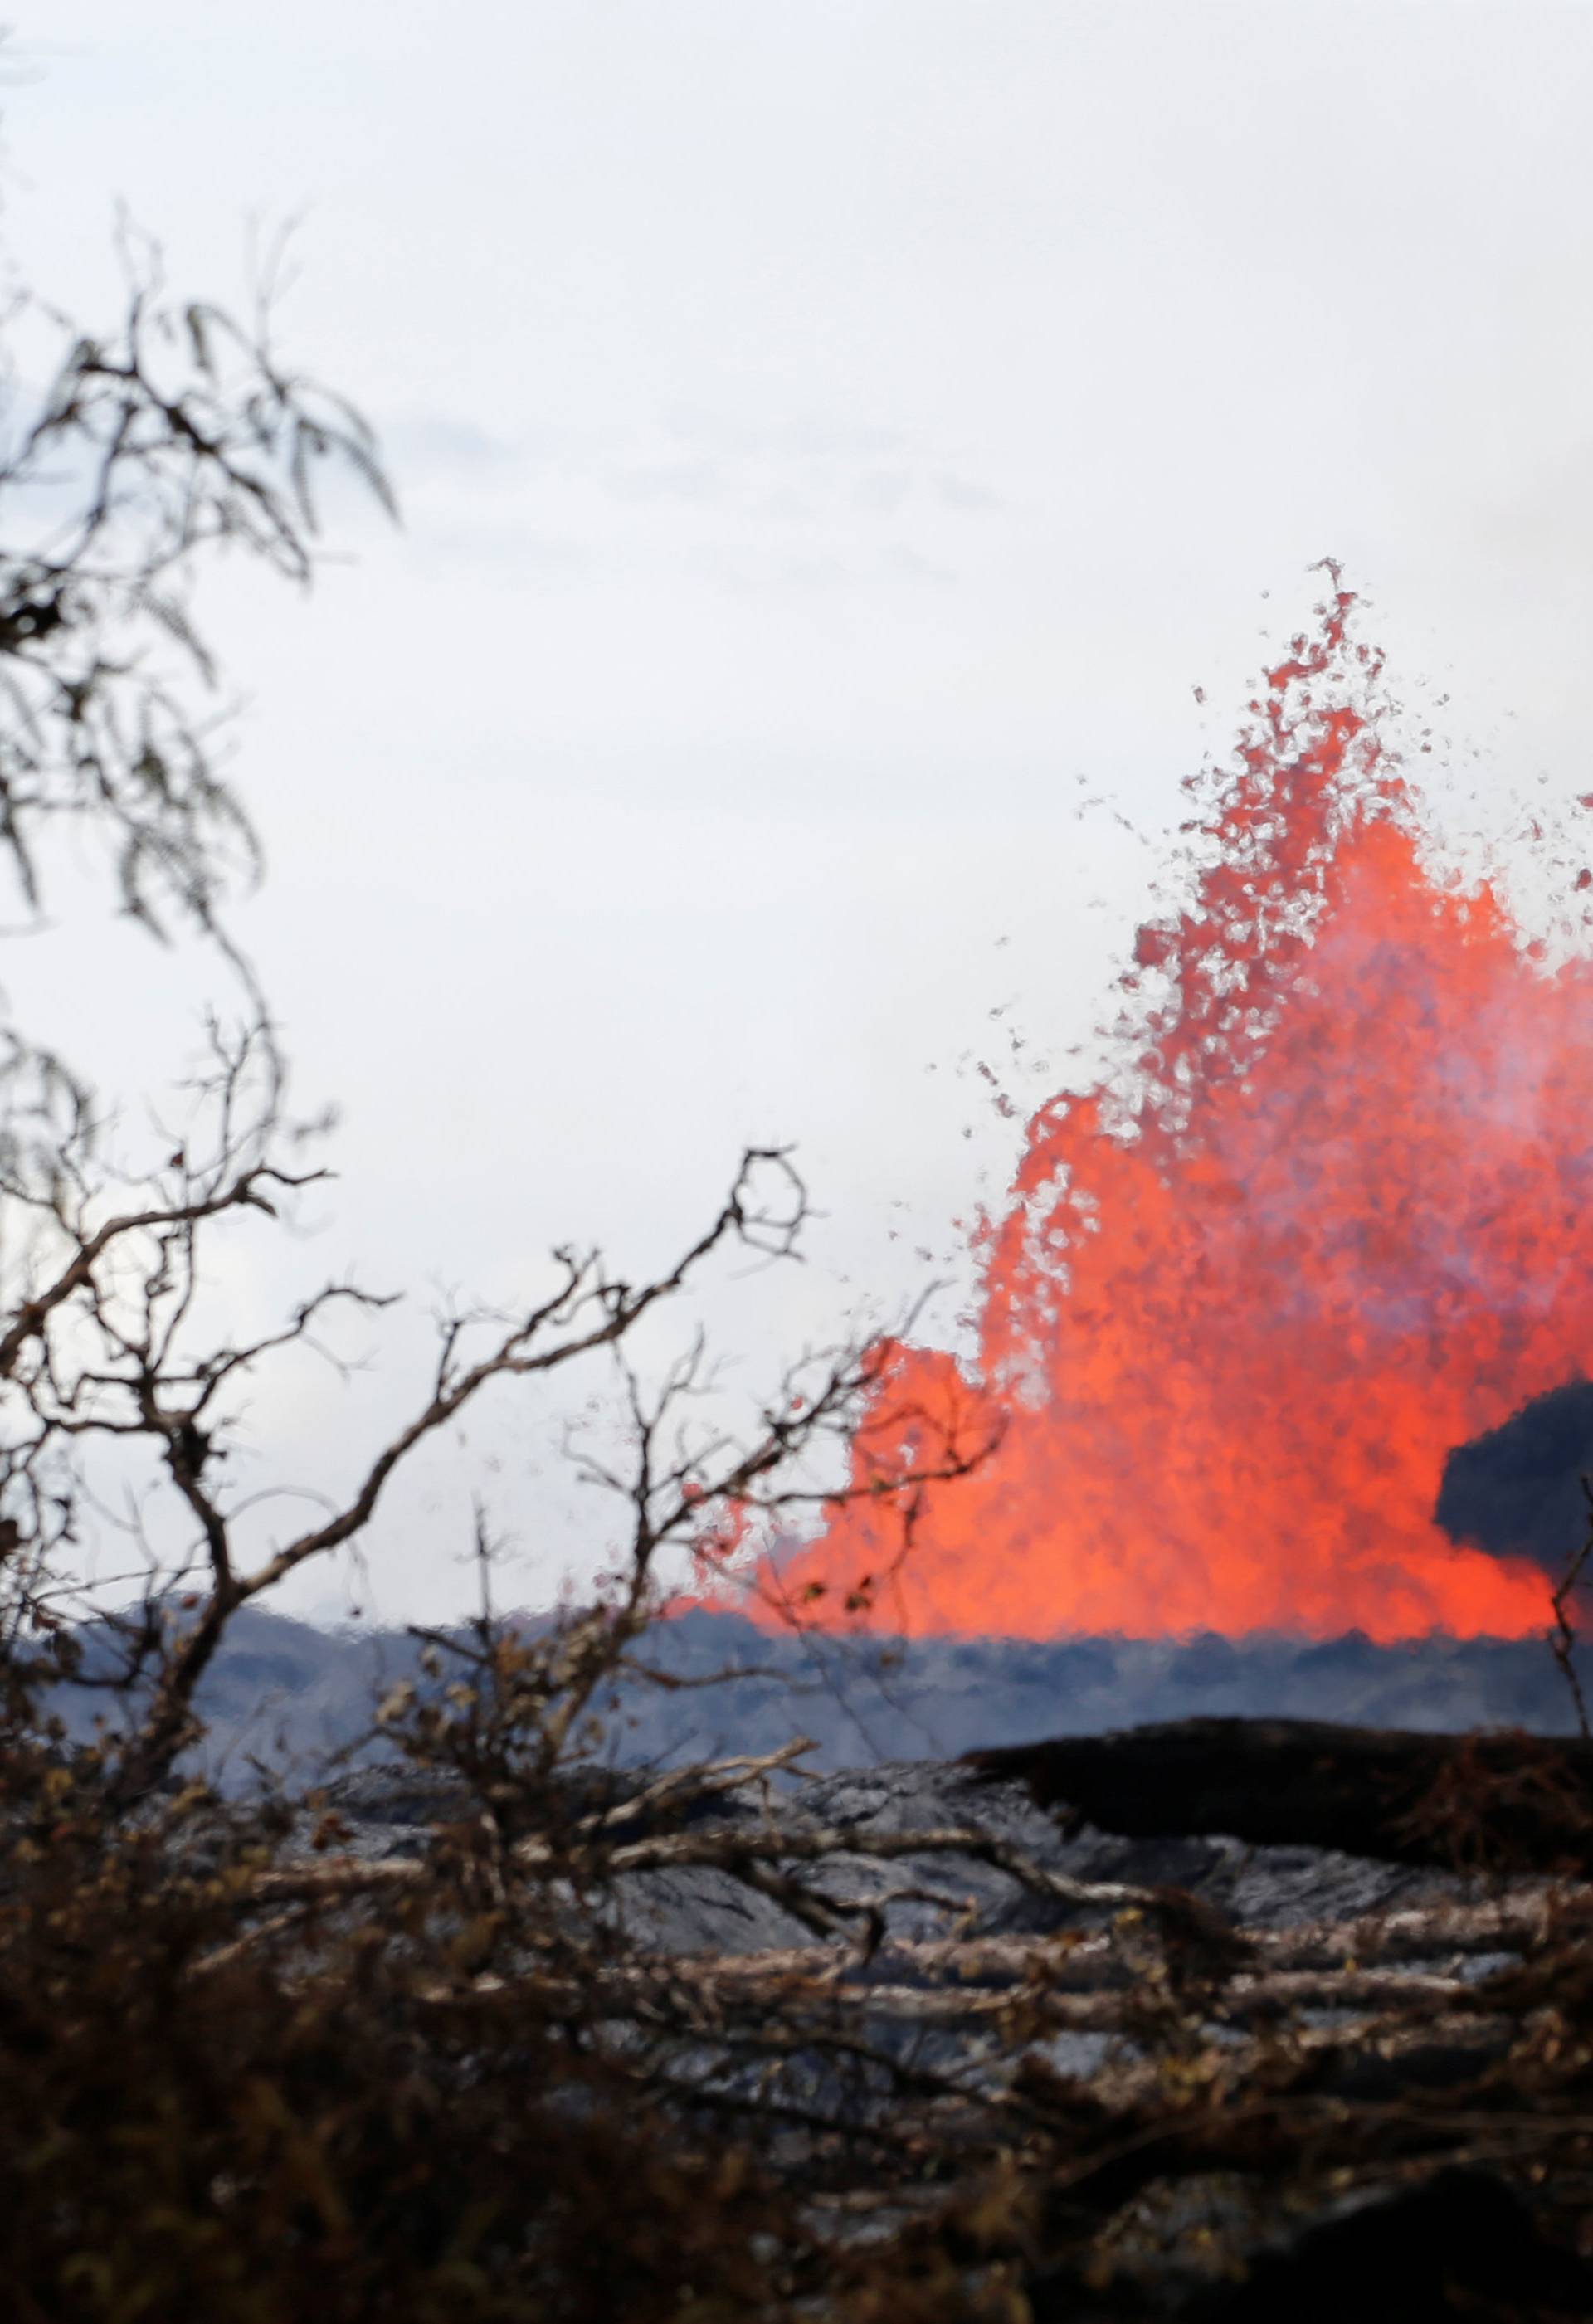 A volcanic fissure spurts molten rock into the air near Nohea Street, in the Leilani Estates, near Pahoa, Hawaii